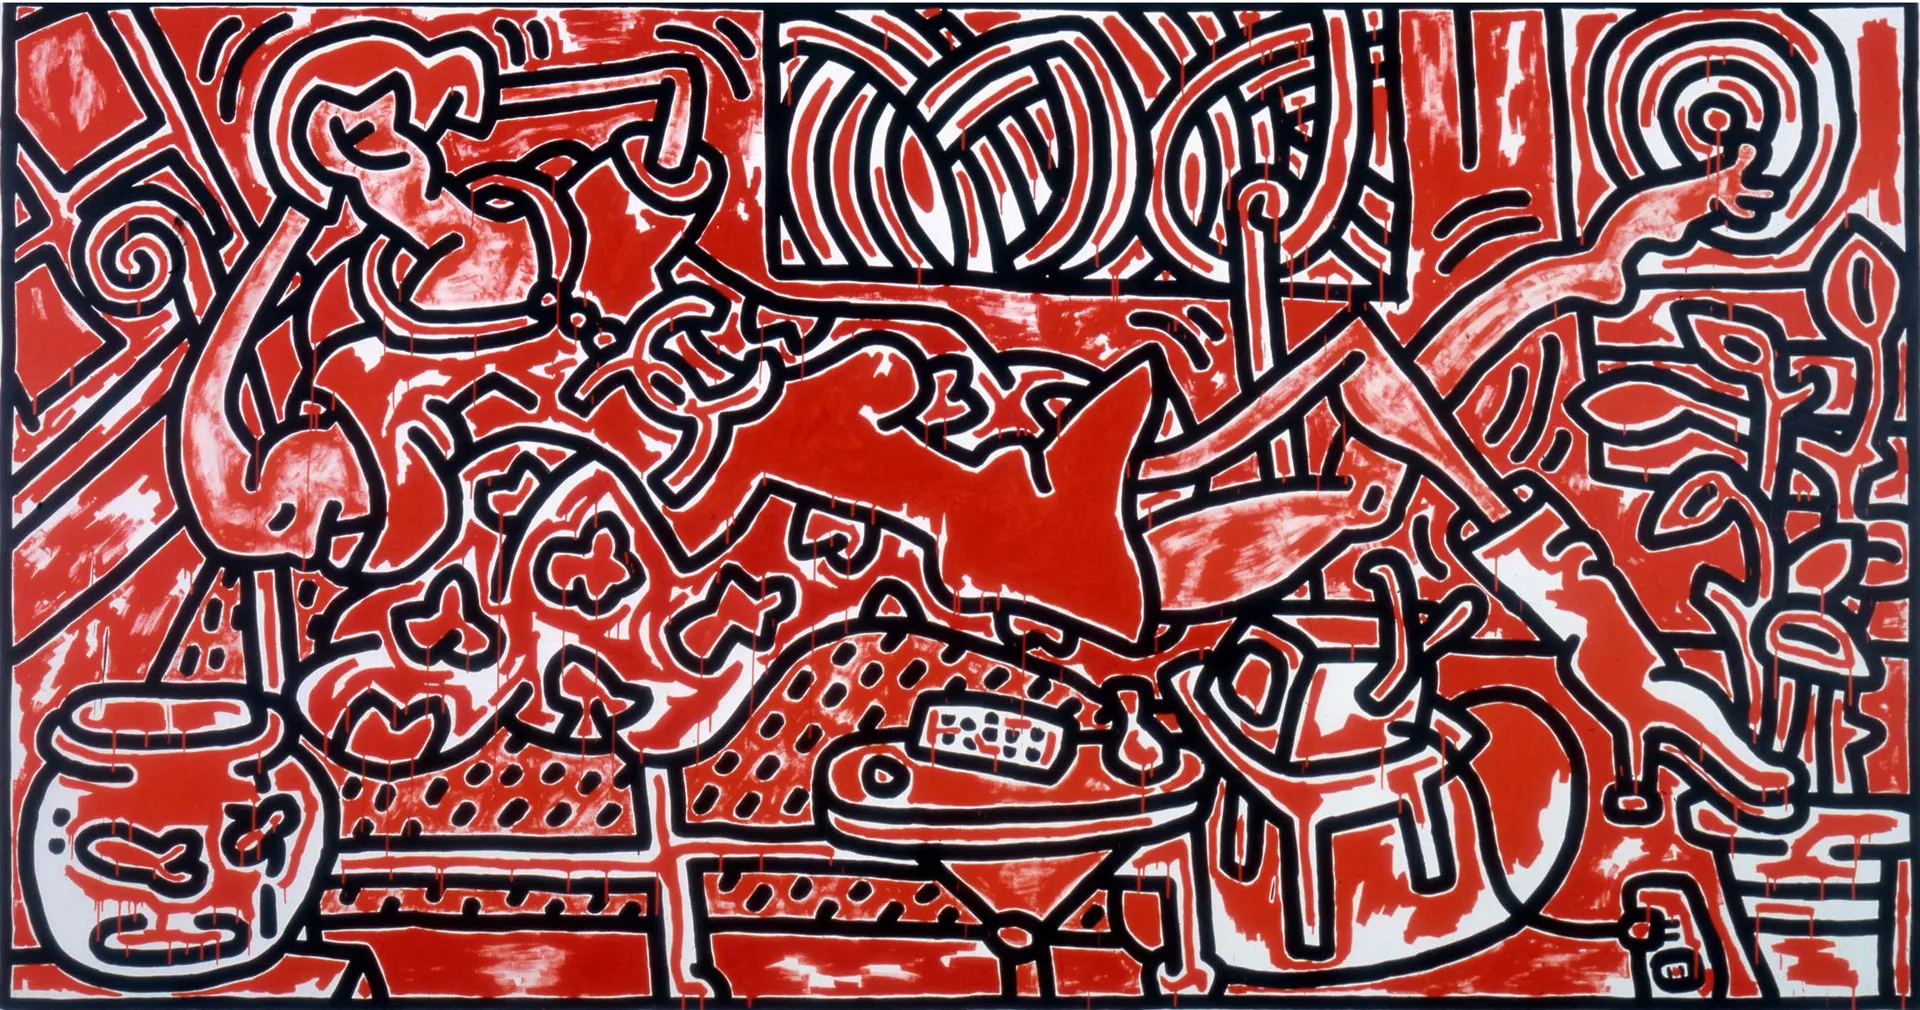 Red Room - Keith Haring | The Broad